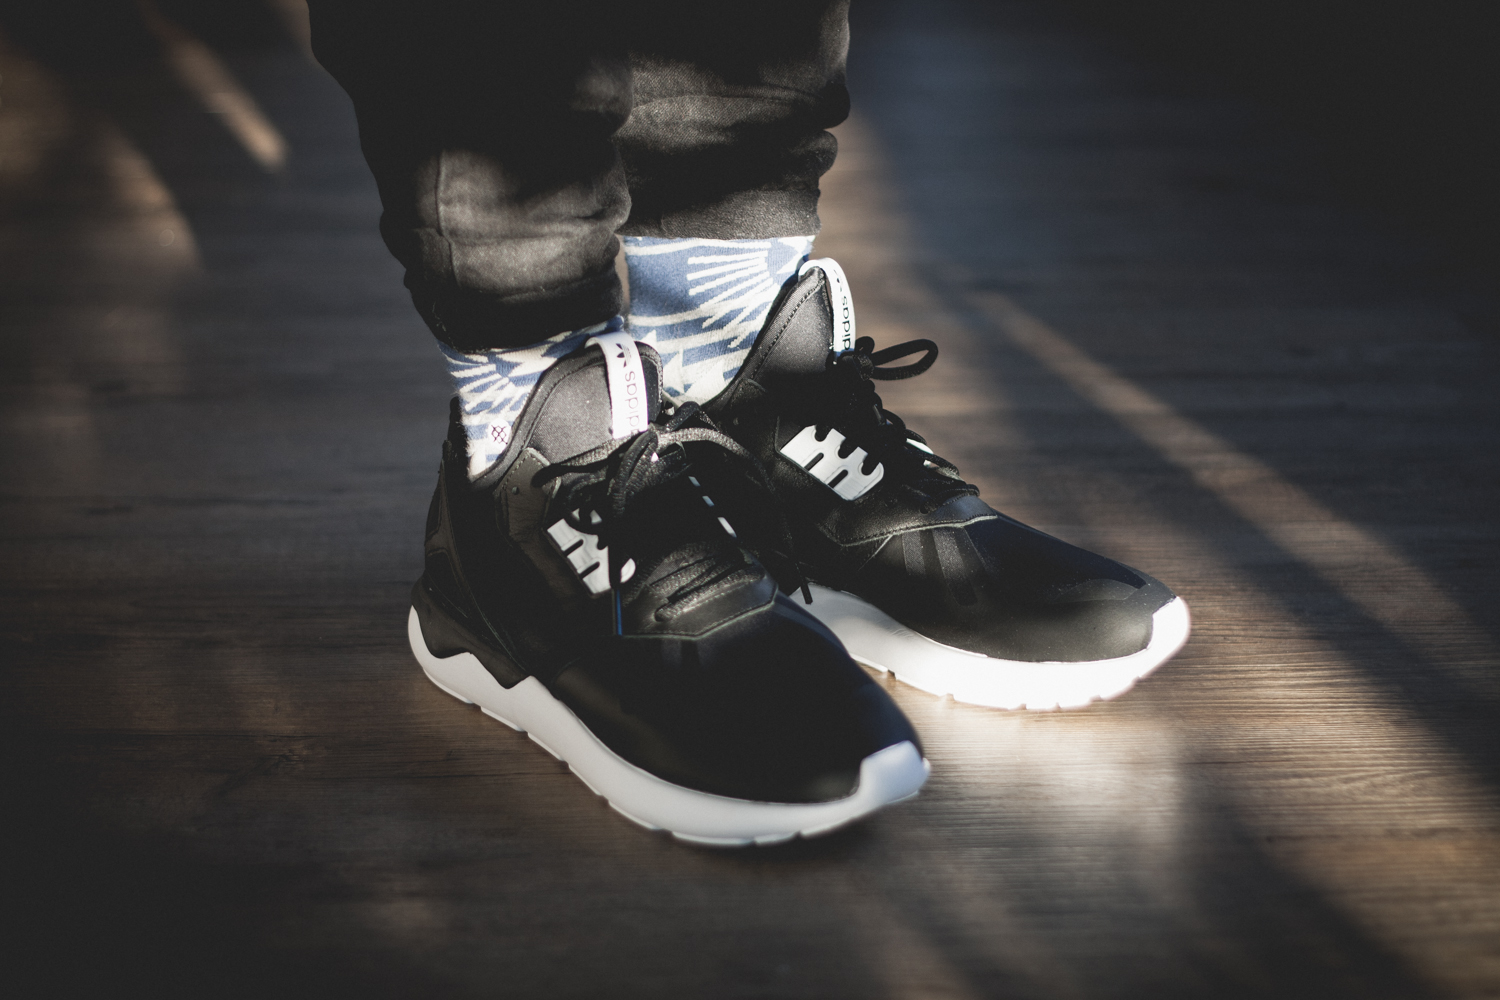 Another Look At The adidas Originals Tubular Runner 'Black / White